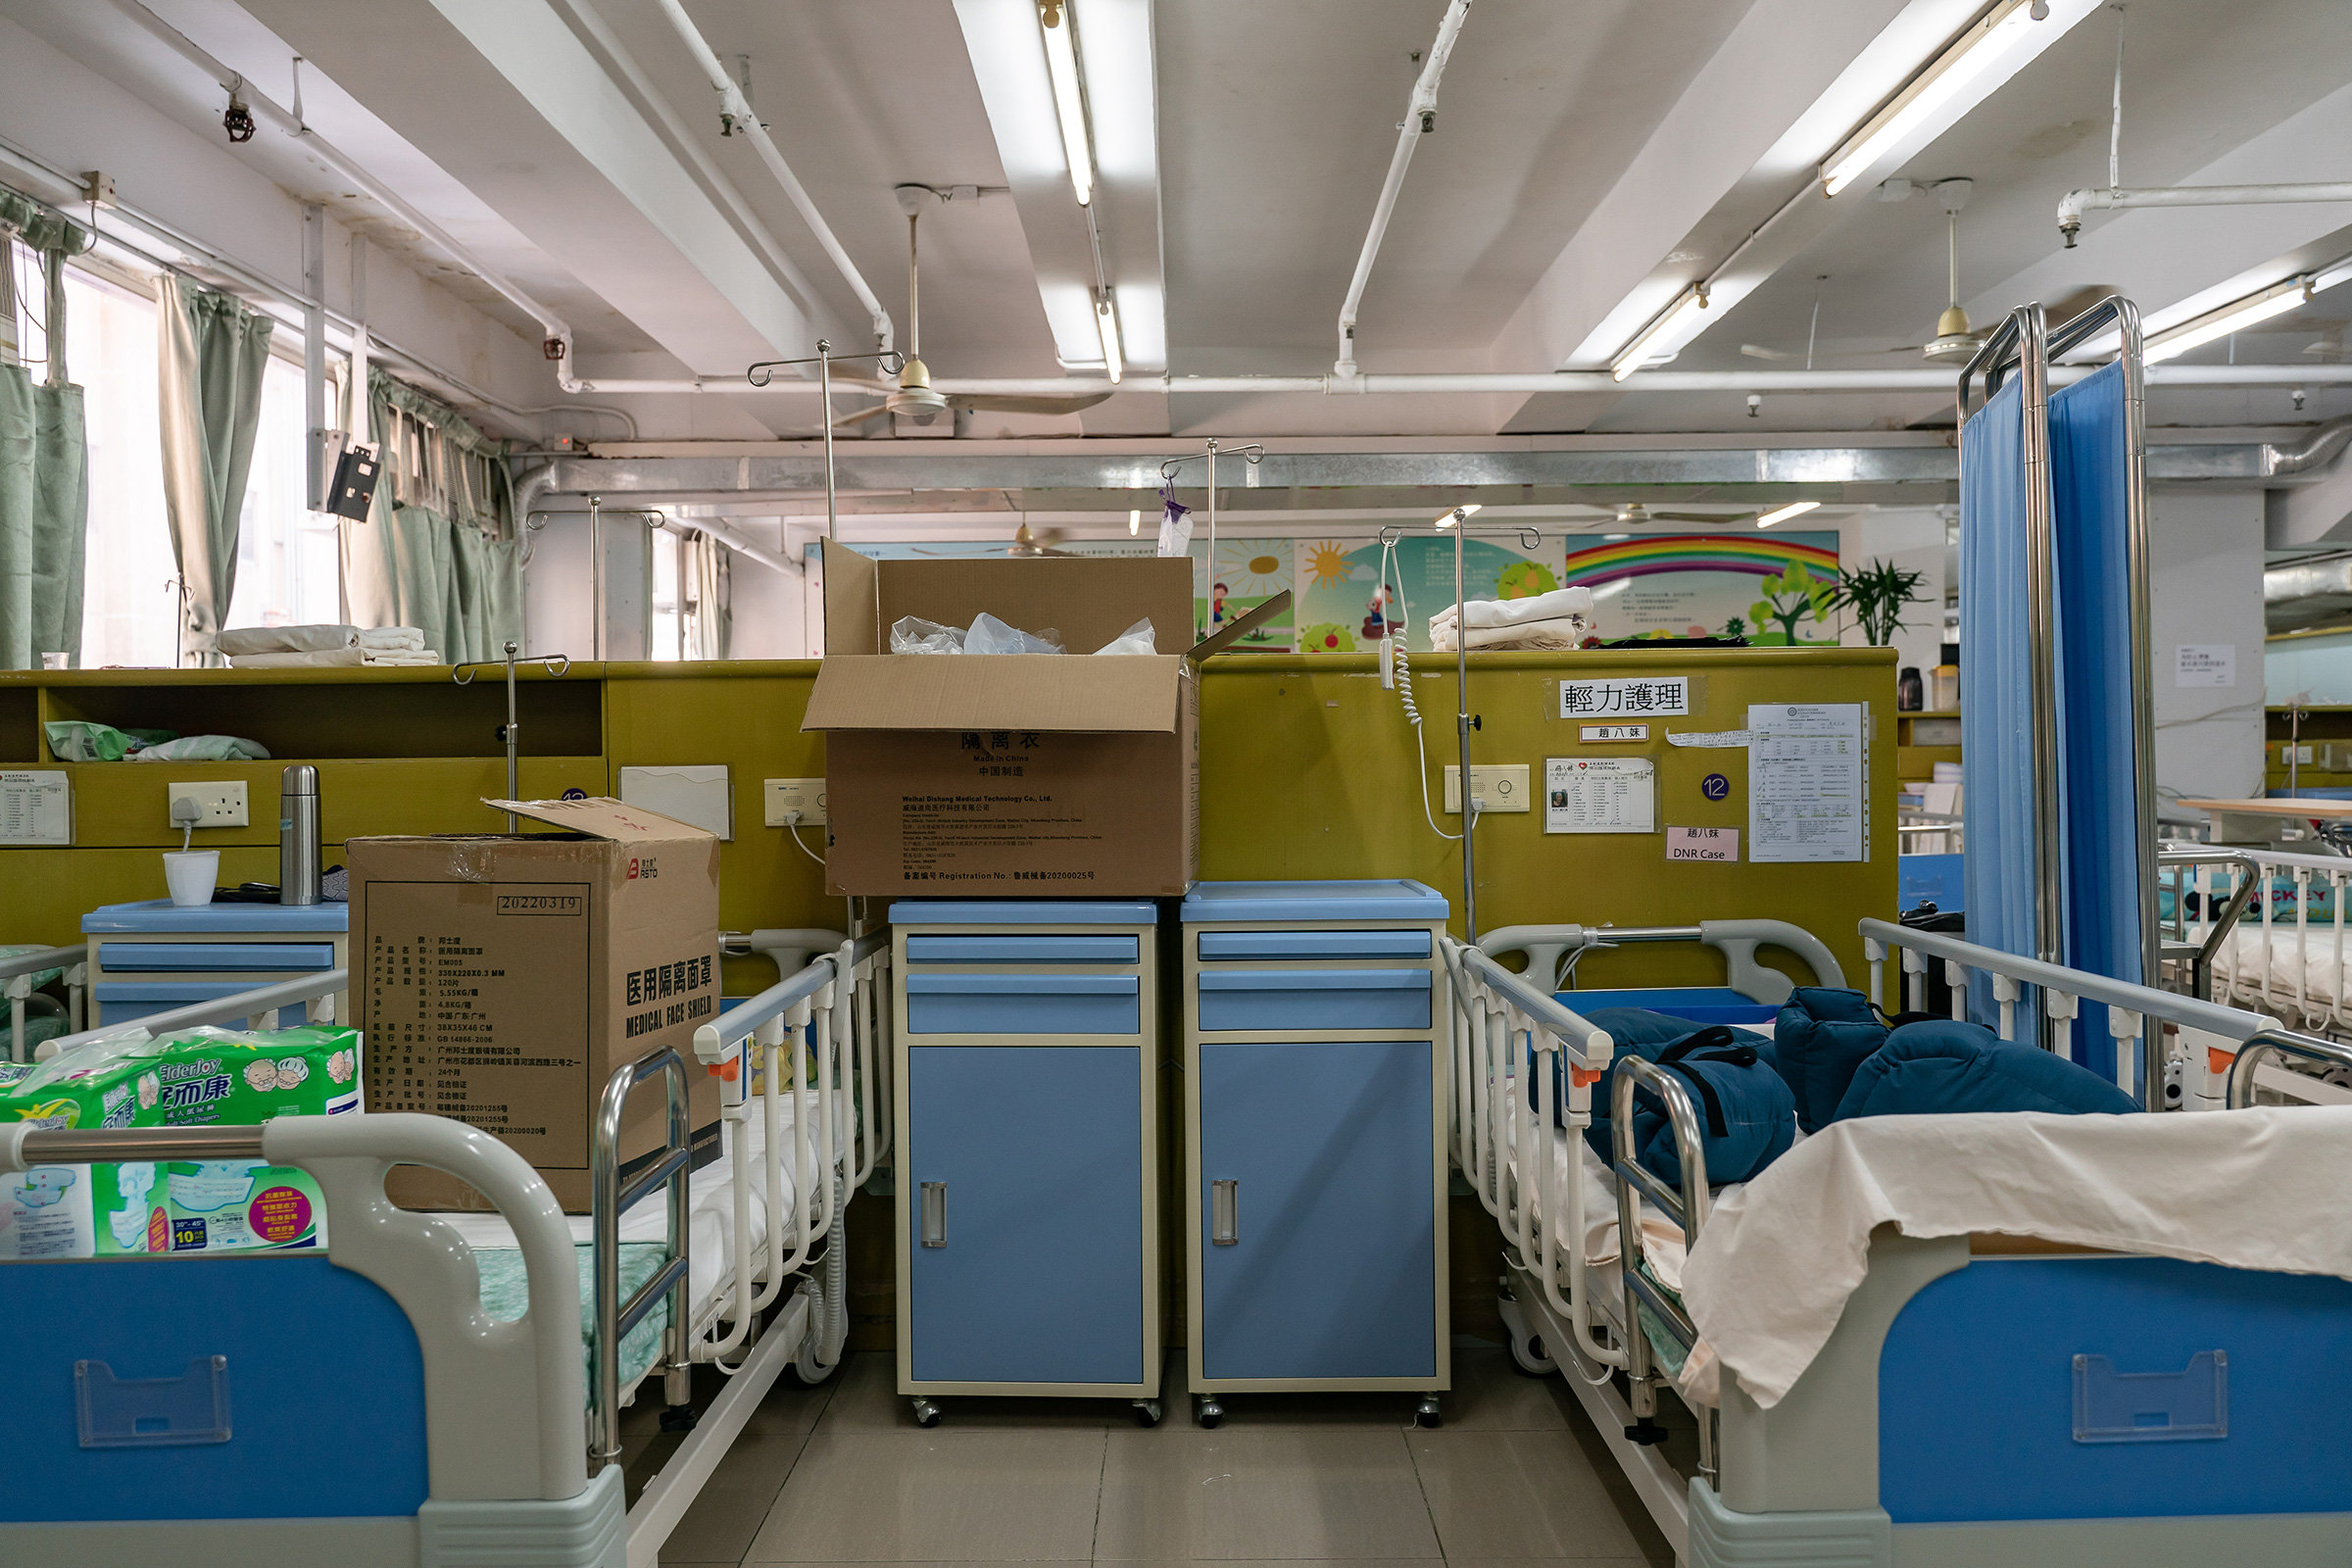 Boxes of supplies on empty beds in zone 6 of the Kei Tak (Tai Hang) Home For The Aged in Yuen Long district on May 6, 2022 in Hong Kong, China. Zone 6 is where the elderly needing the most care stay in the nursing home.